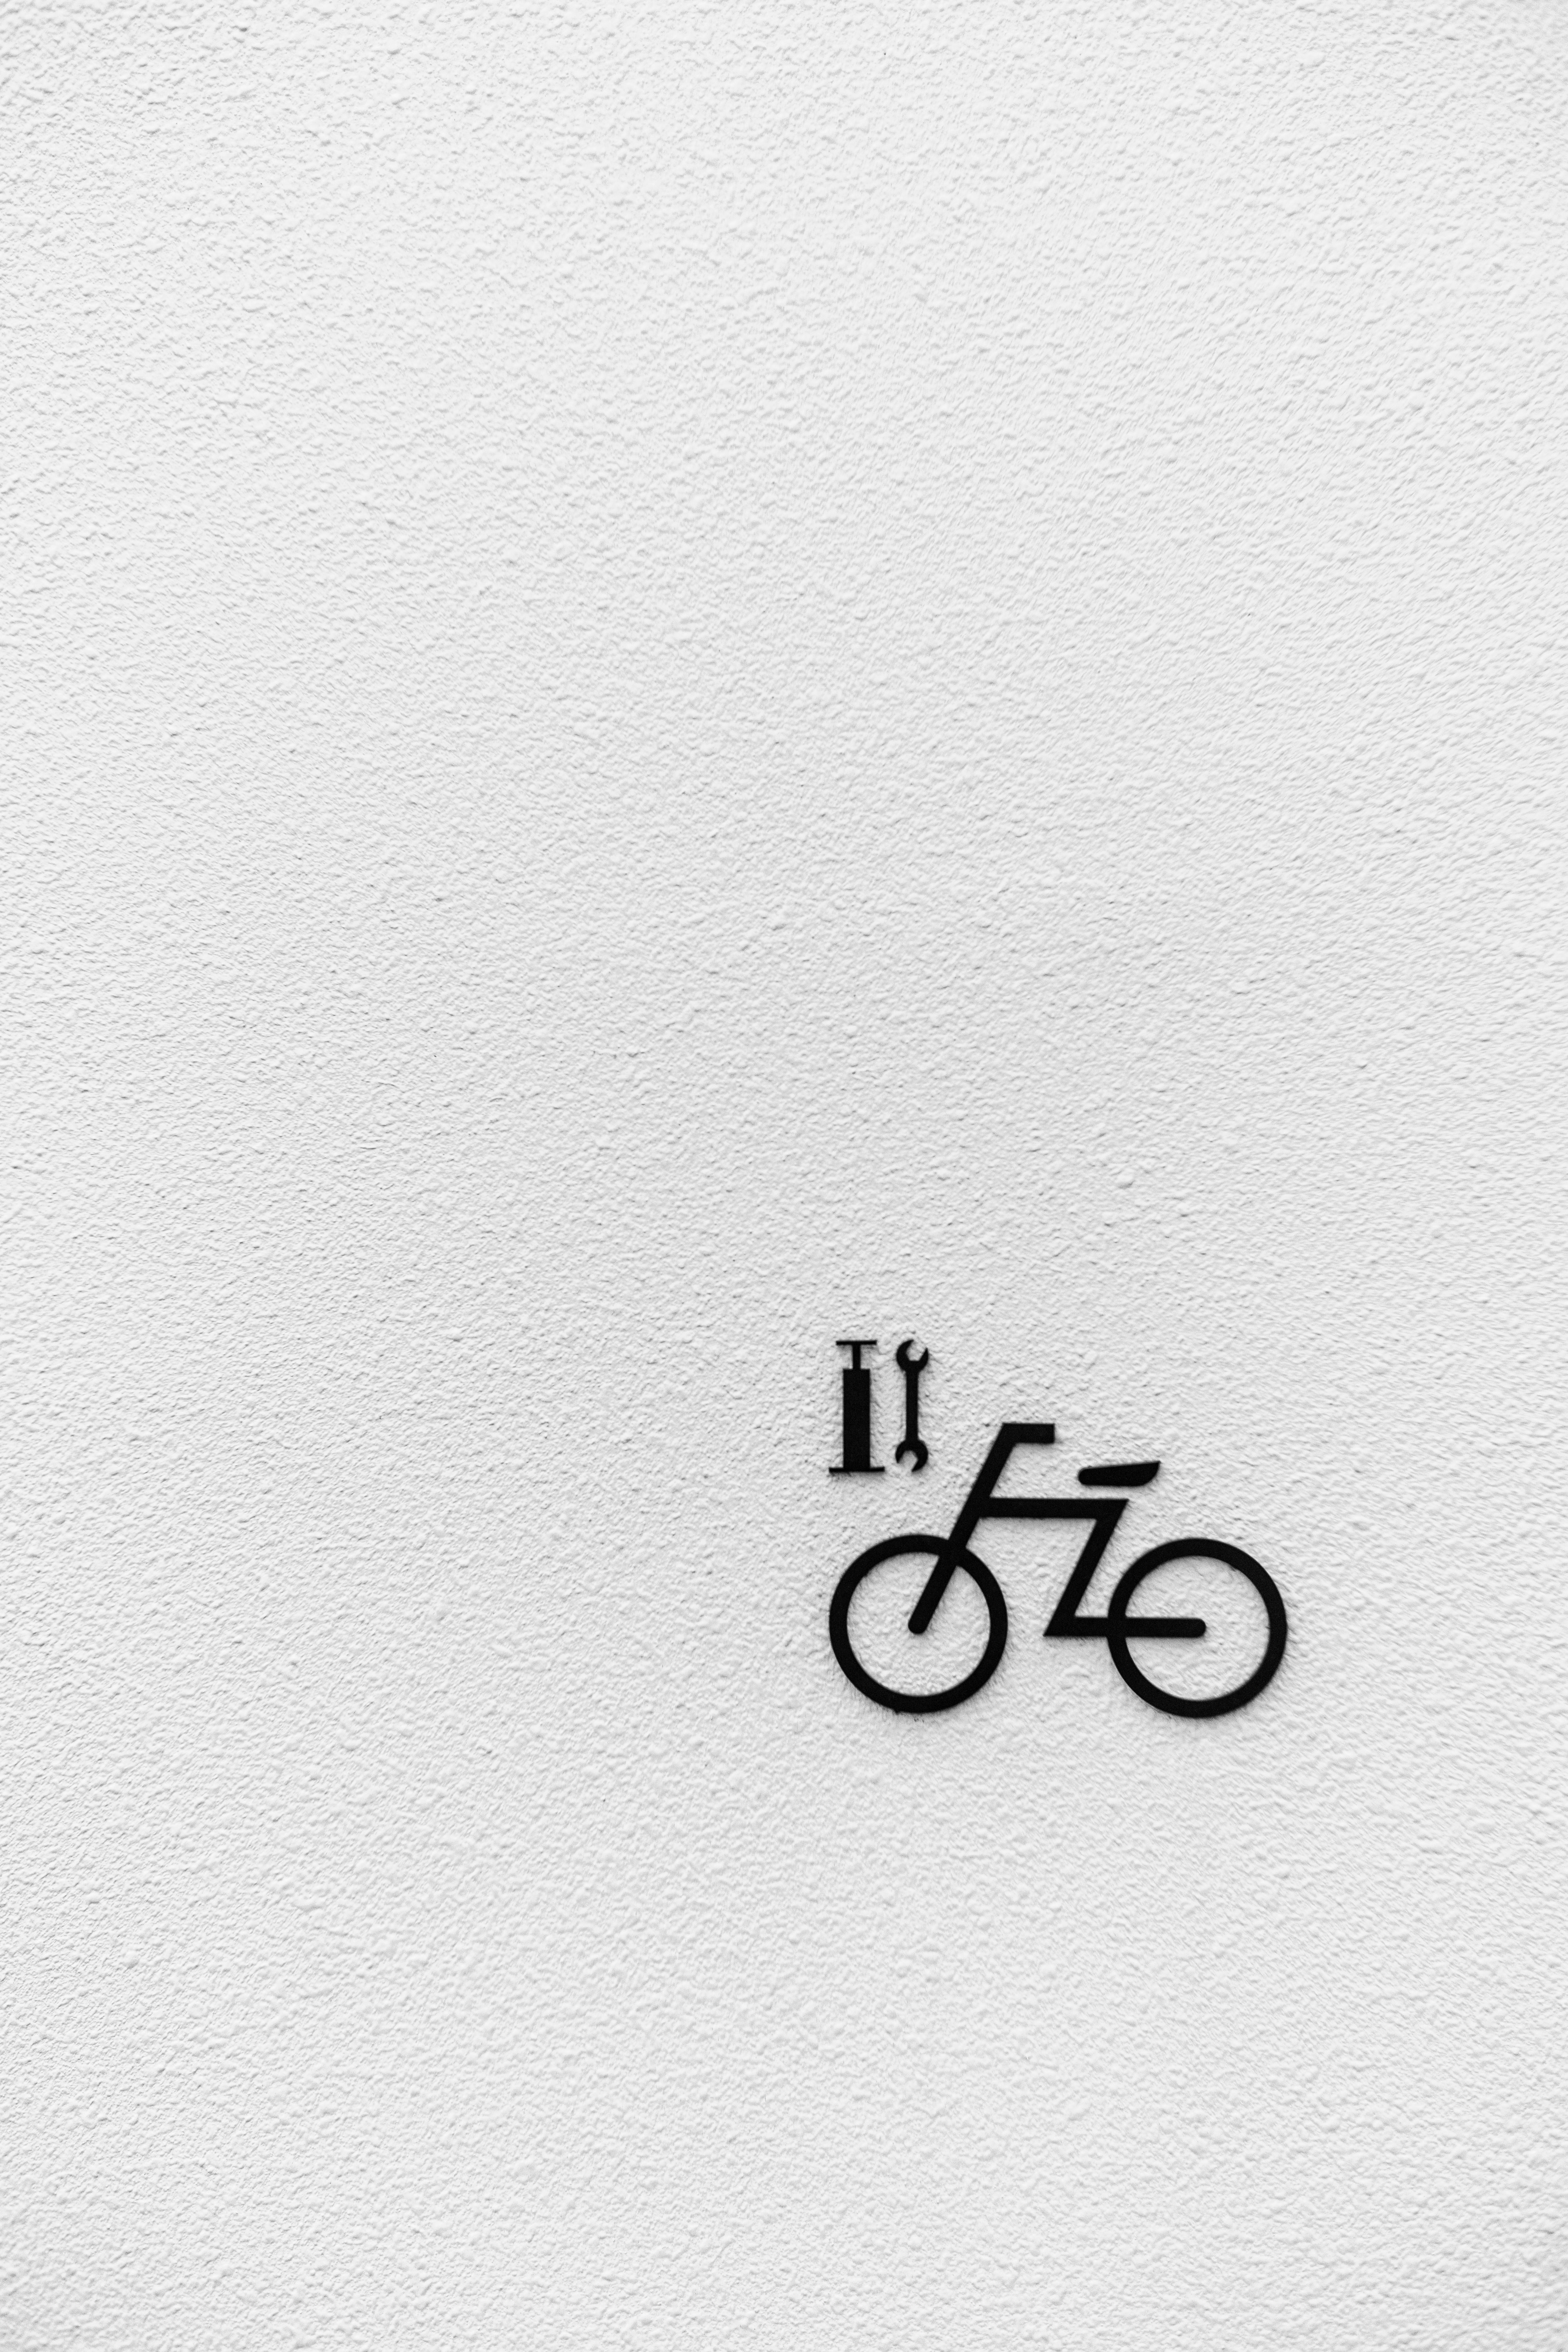 84170 download wallpaper bicycle, texture, textures, wall screensavers and pictures for free